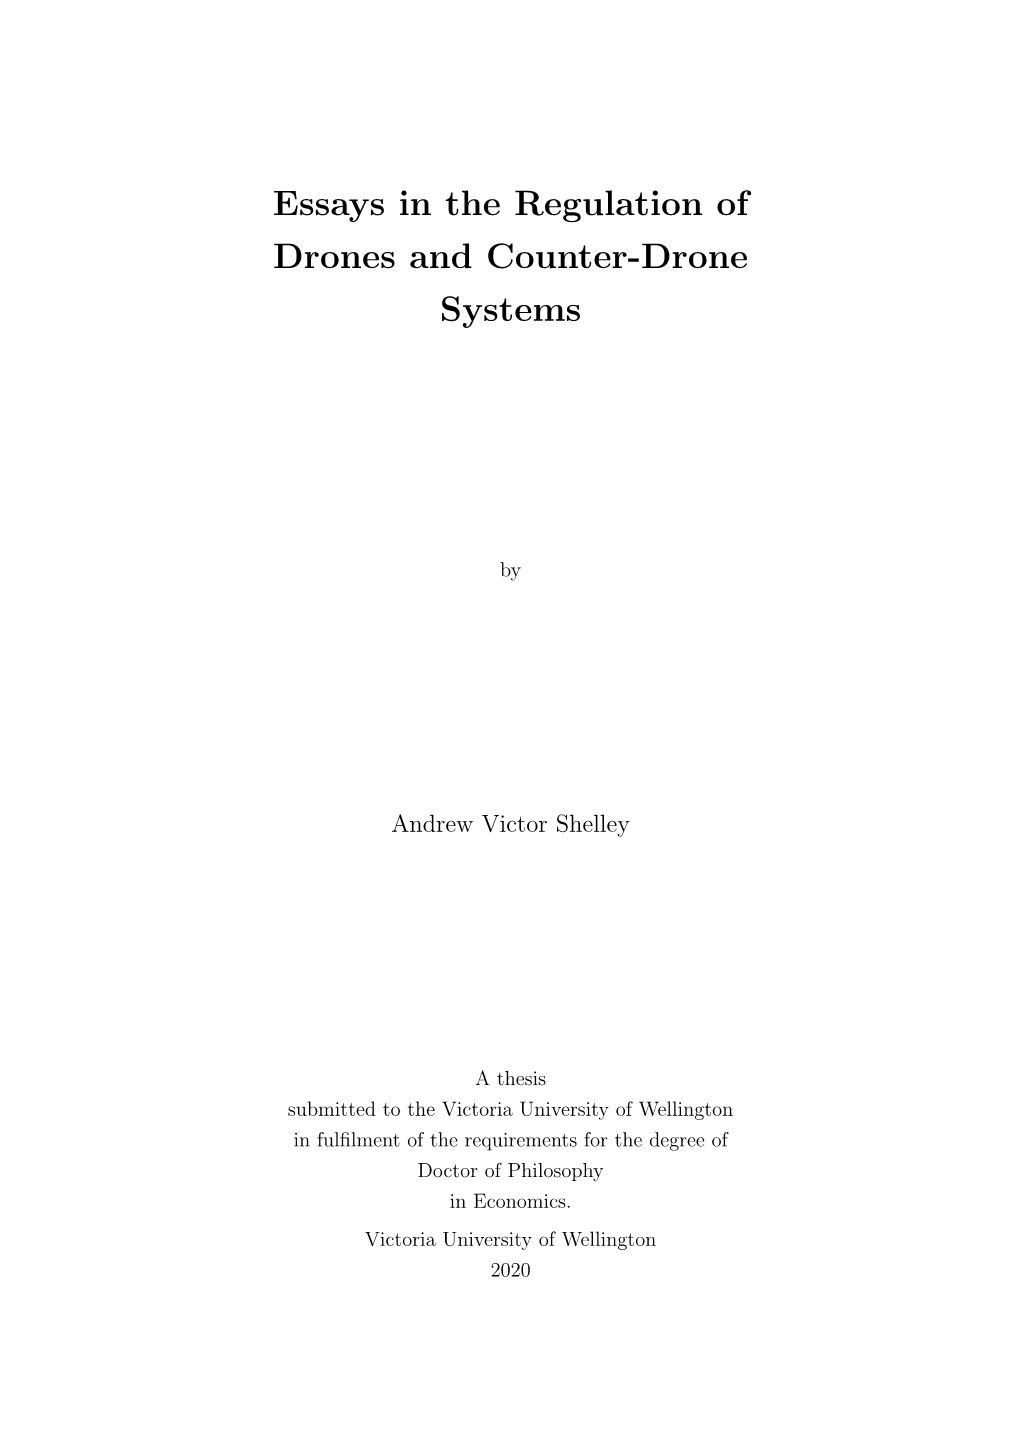 Essays in the Regulation of Drones and Counter-Drone Systems